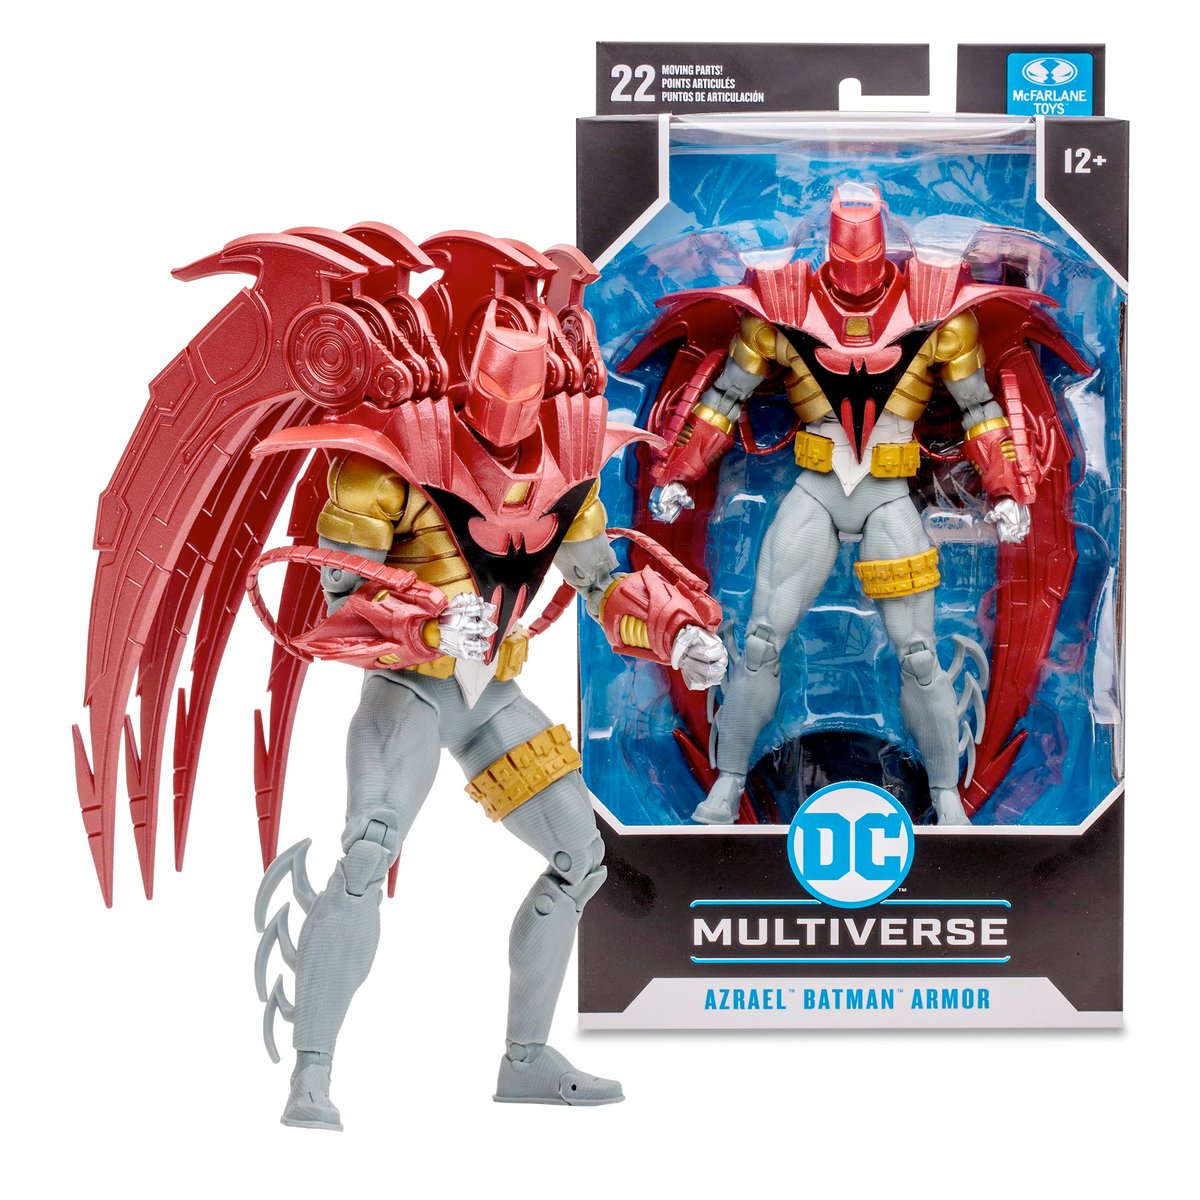 McFarlane Toys DC Multiverse Knightsend Azrael is back up on Amazon ($22.99) - amzn.to/457j0md #ad 

Chance of a chase.